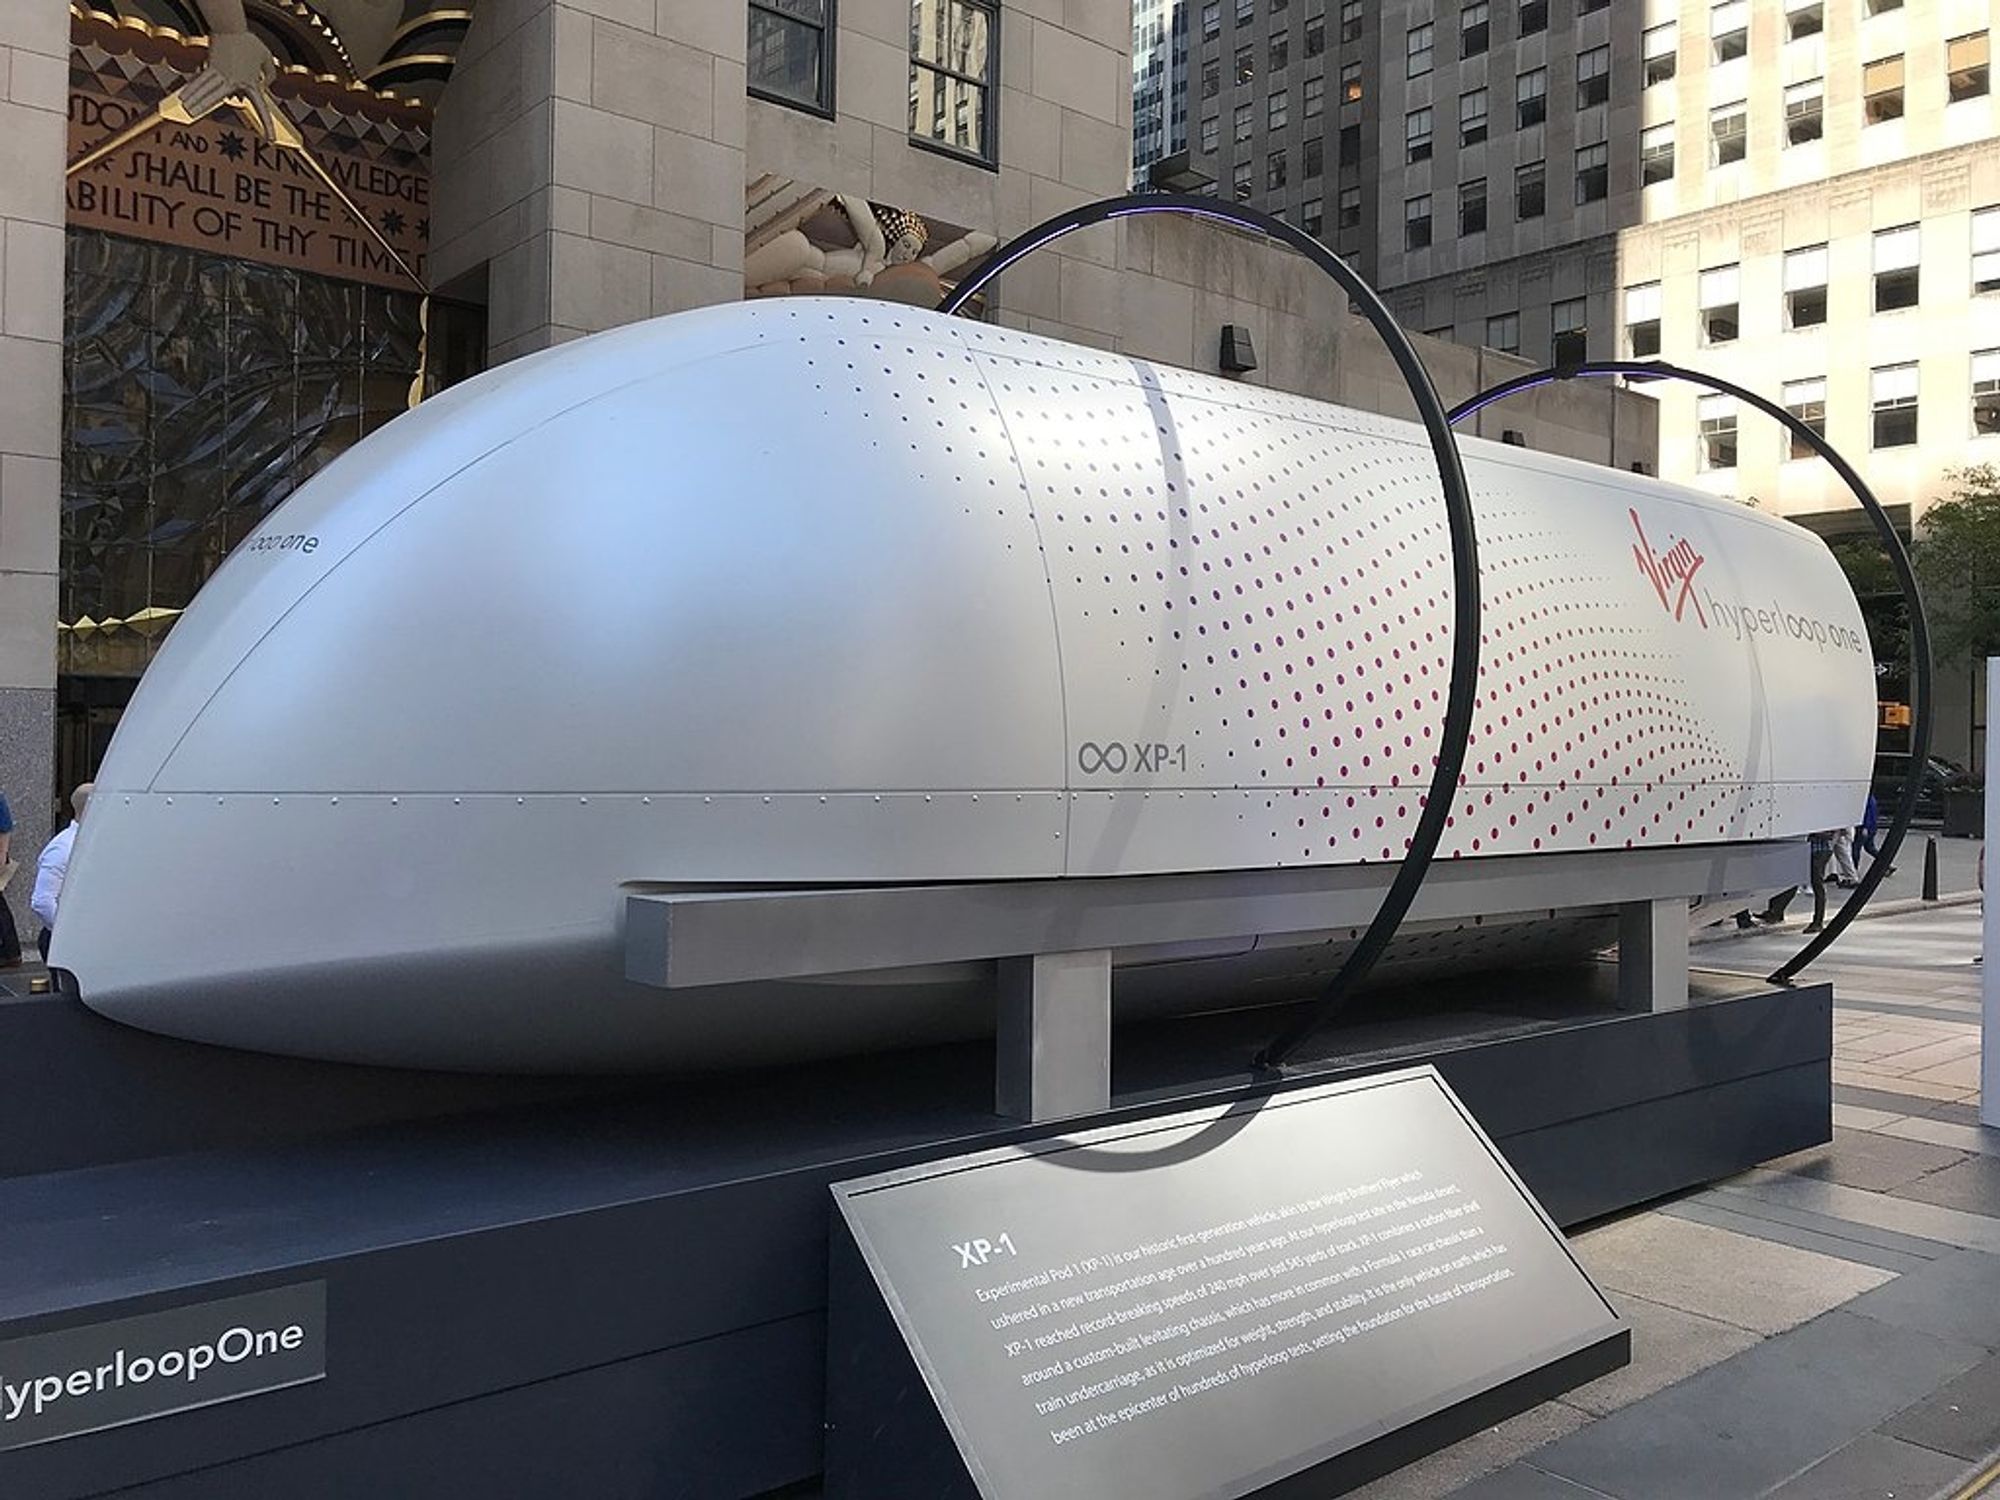 Virgin Hyperloop Lays Off Half Its Staff As It Pivots From Passenger to Cargo Trains